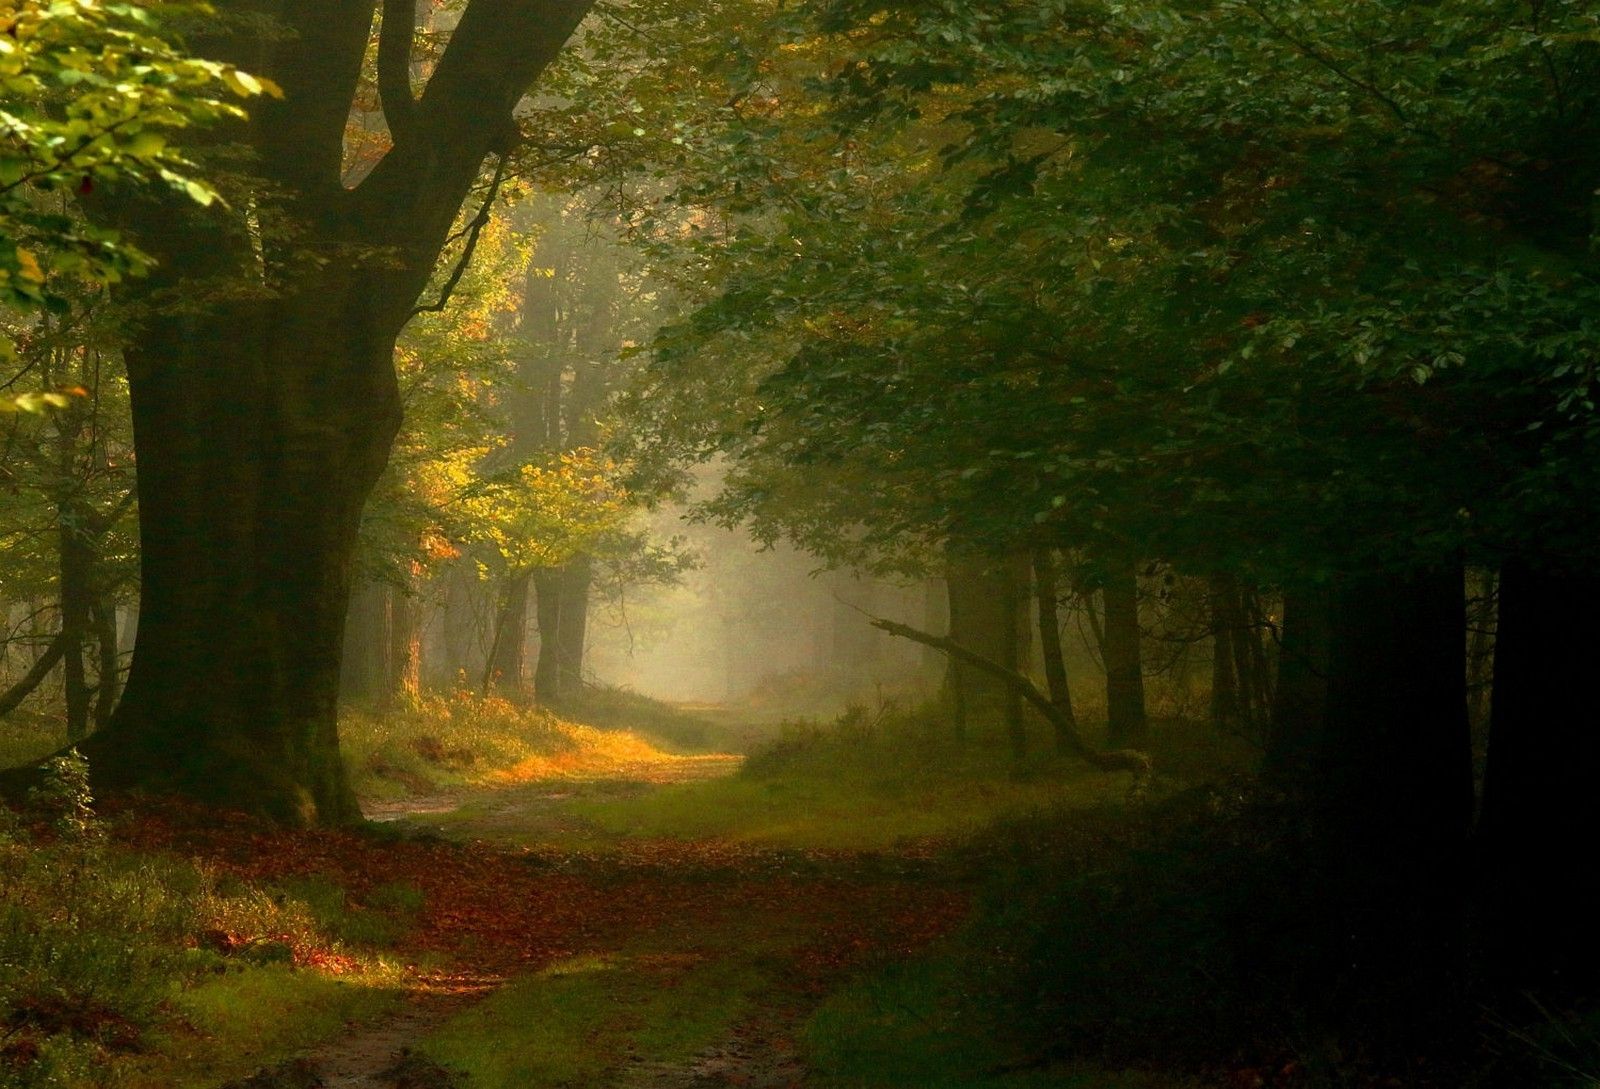 photography, Landscape, Nature, Fairy Tale, Forest, Mist, Path, Sunlight, Trees, Leaves, Netherlands Wallpaper HD / Desktop and Mobile Background